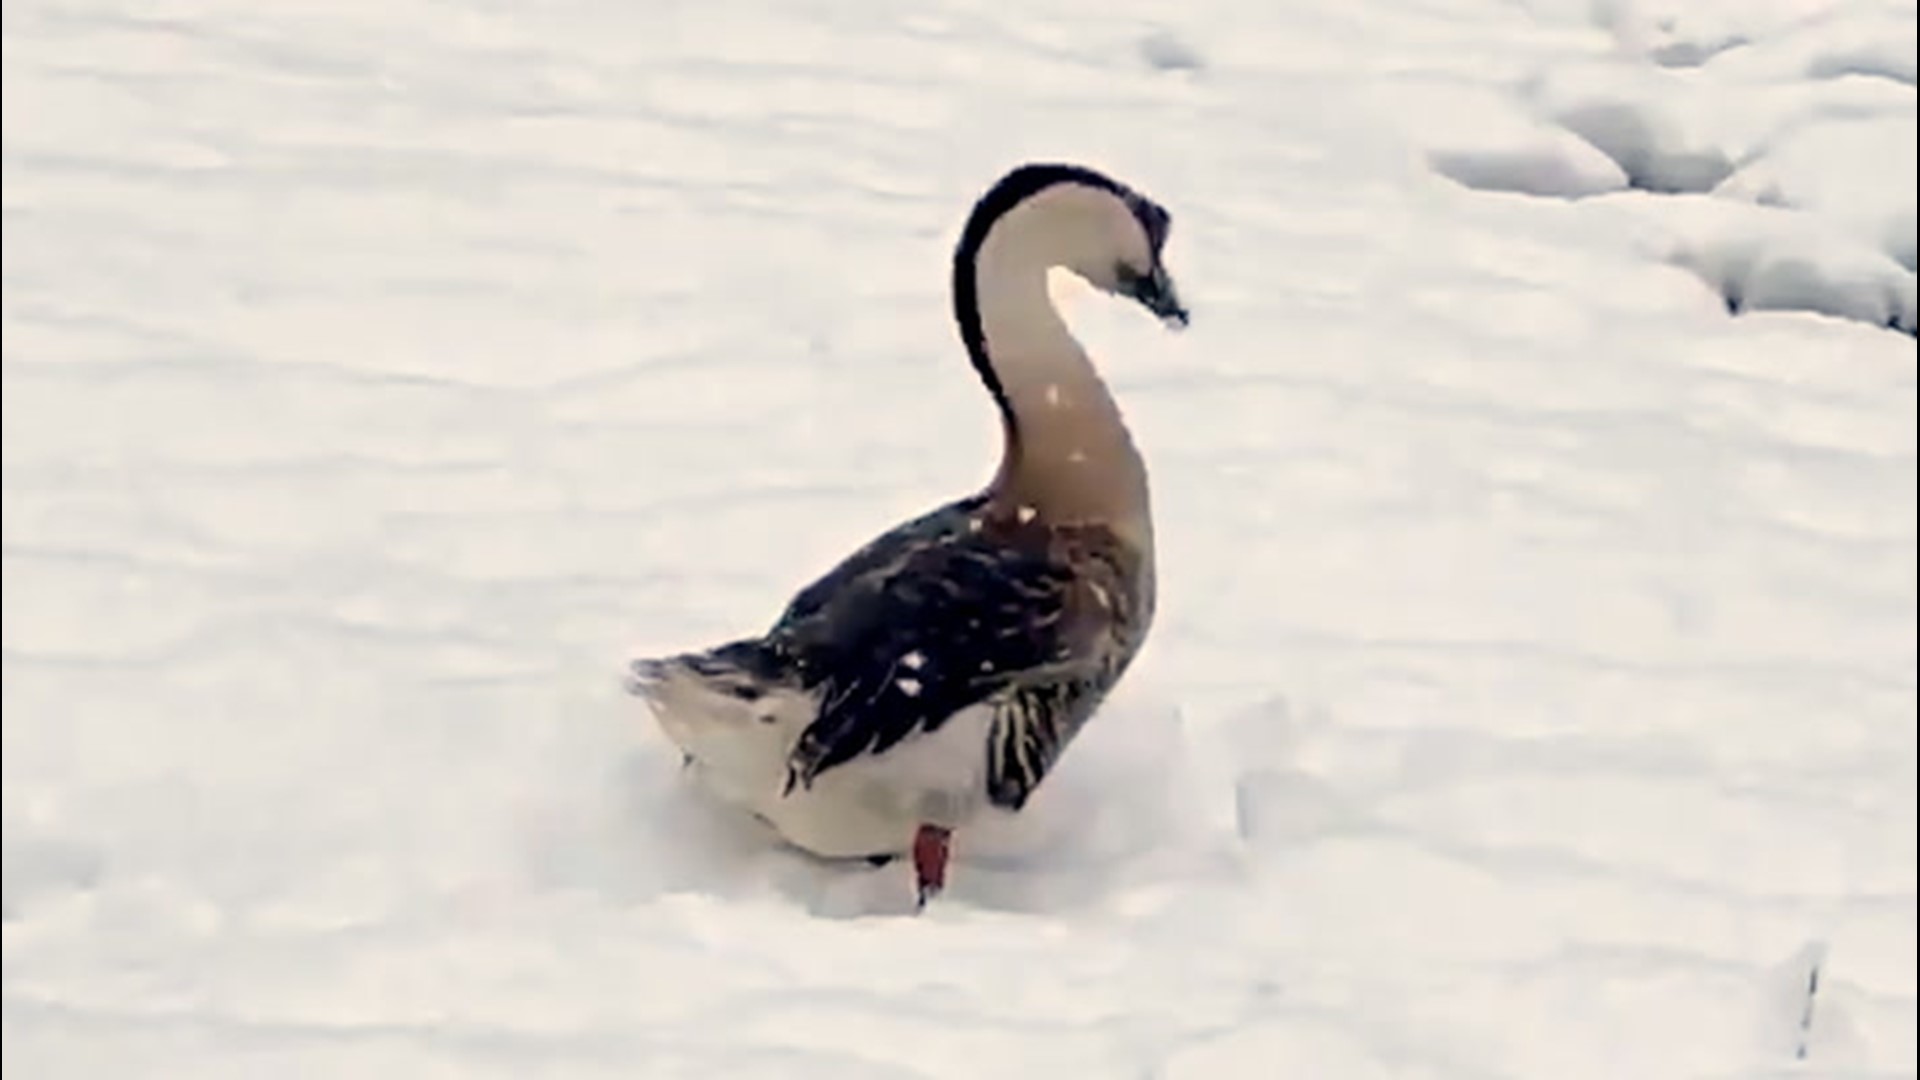 Not everyone was happy to get winter weather across New England in mid-April, but this goose was certainly having a good time.